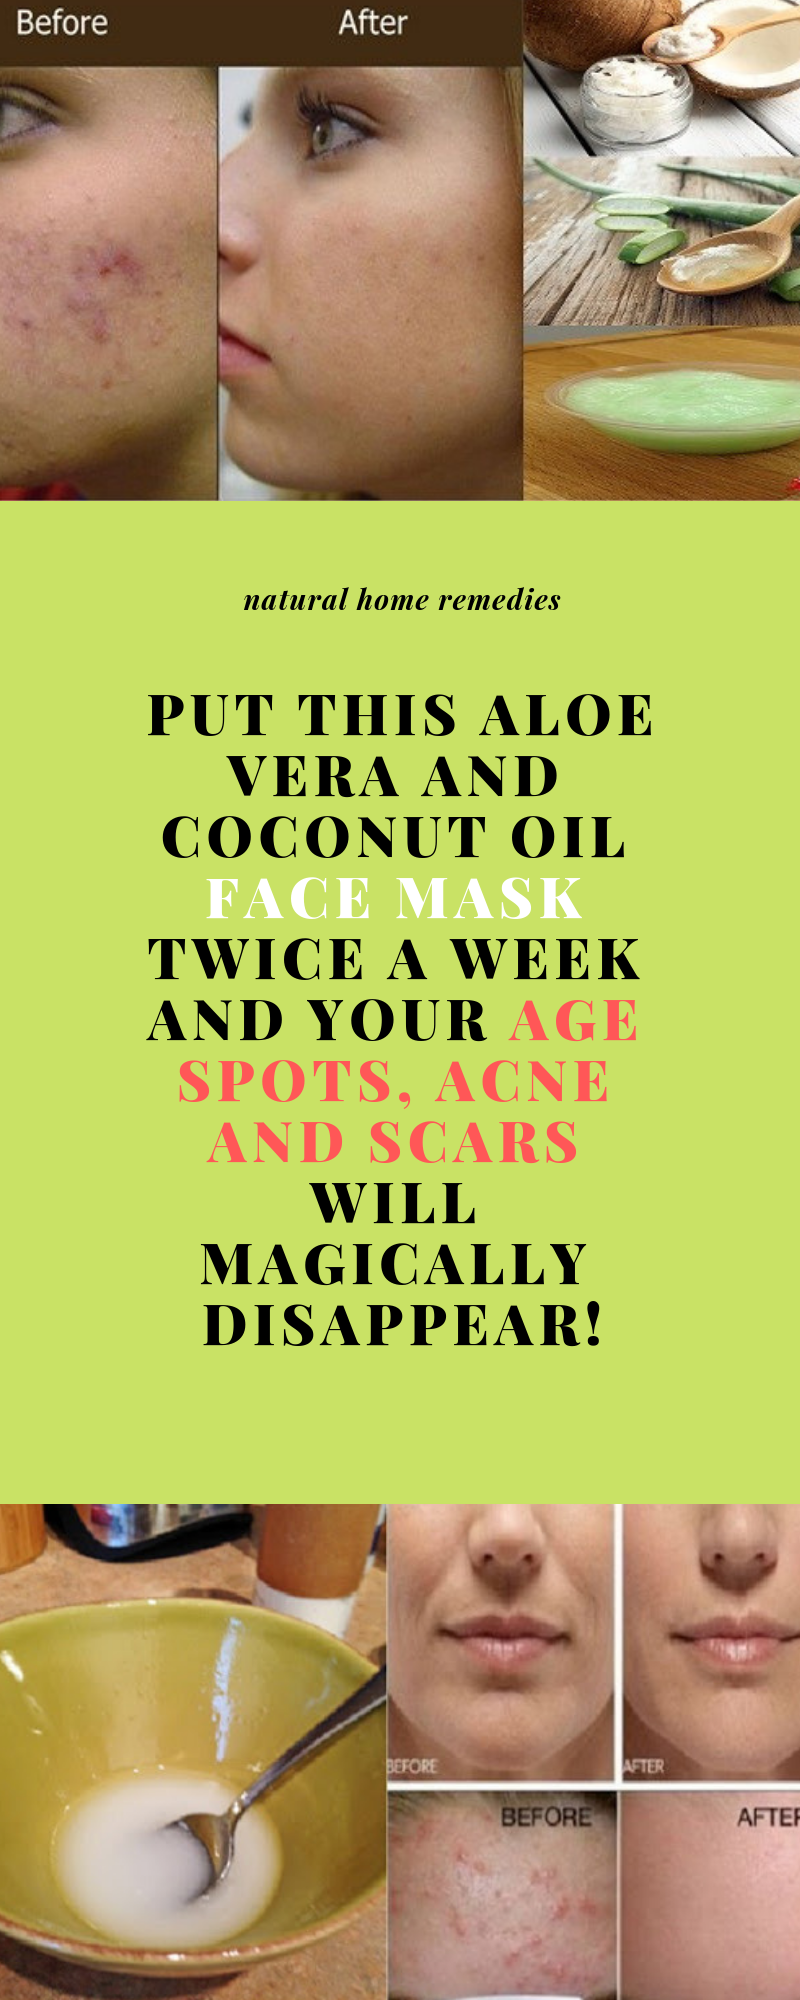 PUT THIS ALOE VERA AND COCONUT OIL FACE MASK TWICE A WEEK AND YOUR AGE SPOTS, ACNE AND SCARS WILL MA -   9 skin care Scars insight ideas